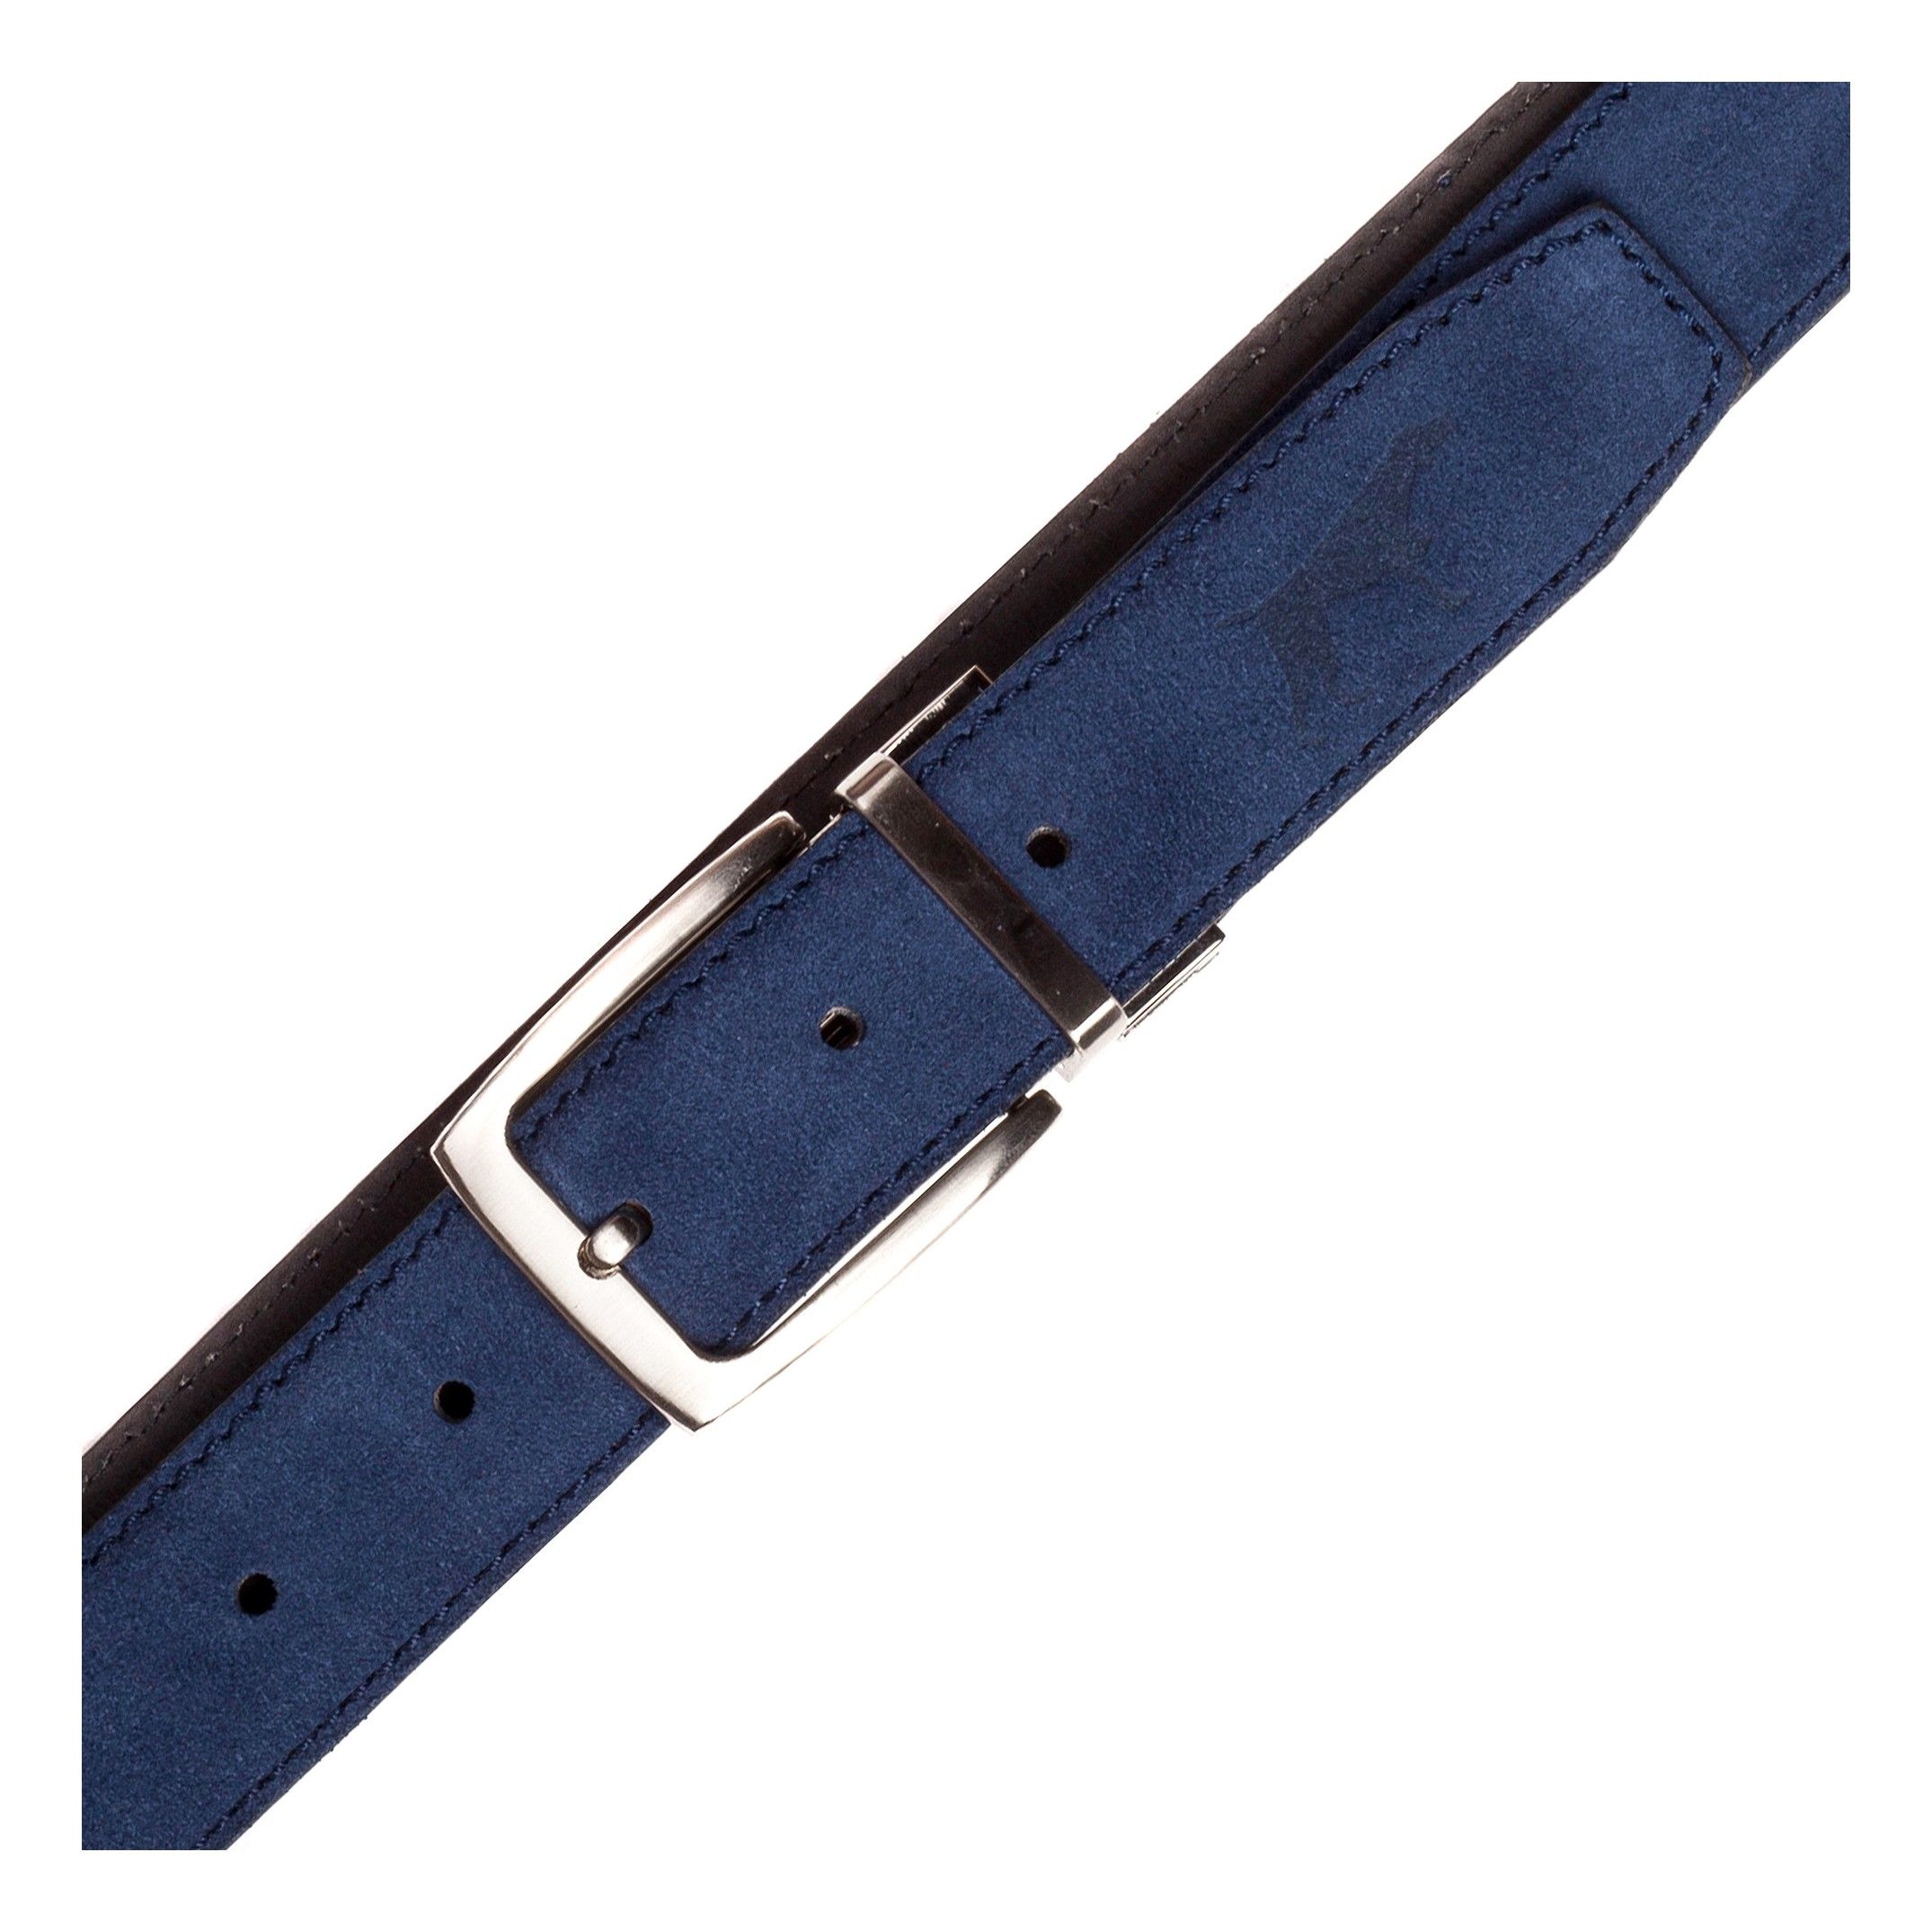 Special belts to wear in casual and formal occasions. Leather belt with adjustable closure. Different colors to wear this season. Made in Spain.